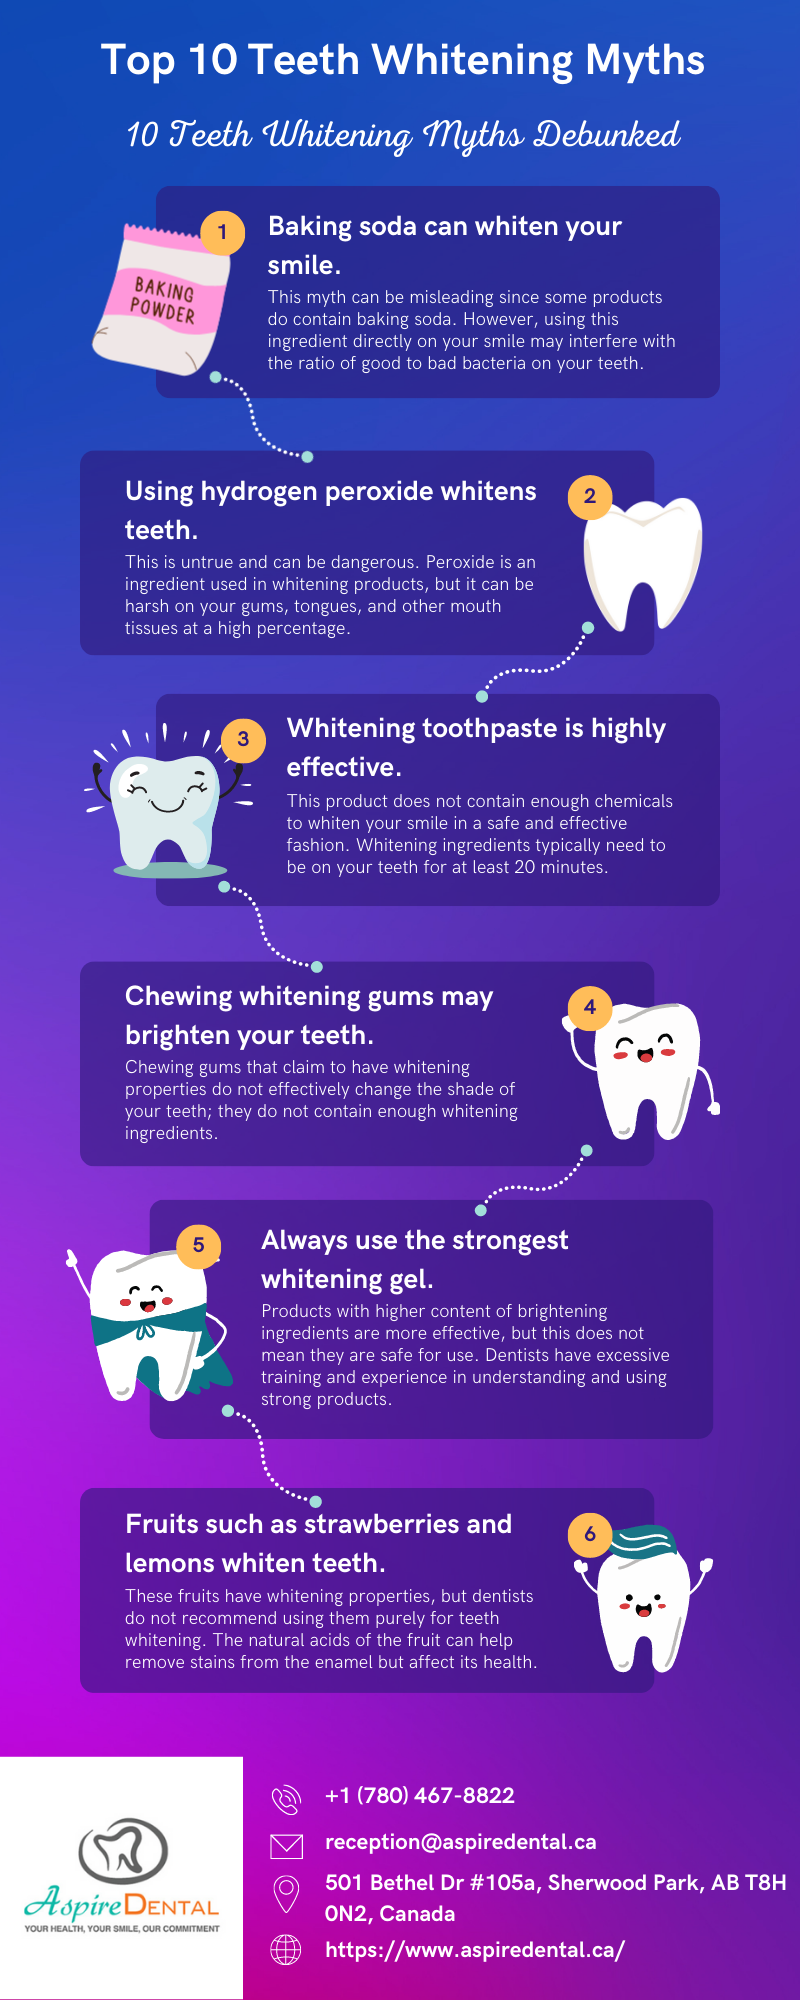 Top 10 Teeth Whitening Myths
10 Teeth Whitening Myths Debunked

Baking soda can whiten your
smile.

  

 

 

_
Using hydrogen peroxide whitens
teeth
J xd i
a fin
id

oo

A ad Whitening toothpaste is highly

EEE:

 

 

Chewing whitening gums may
SFI el (acid

   

Always use the strongest
whitening gel.

 

ha J
Fruits such as strawberries and (6)
lemons whiten teeth.

 

+1 (780) 467-8822

reception@aspiredental.ca

501 Bethel Dr #105a, Sherwood Park, AB T8H
ON2, Canada

https: //www.aspiredental.ca/